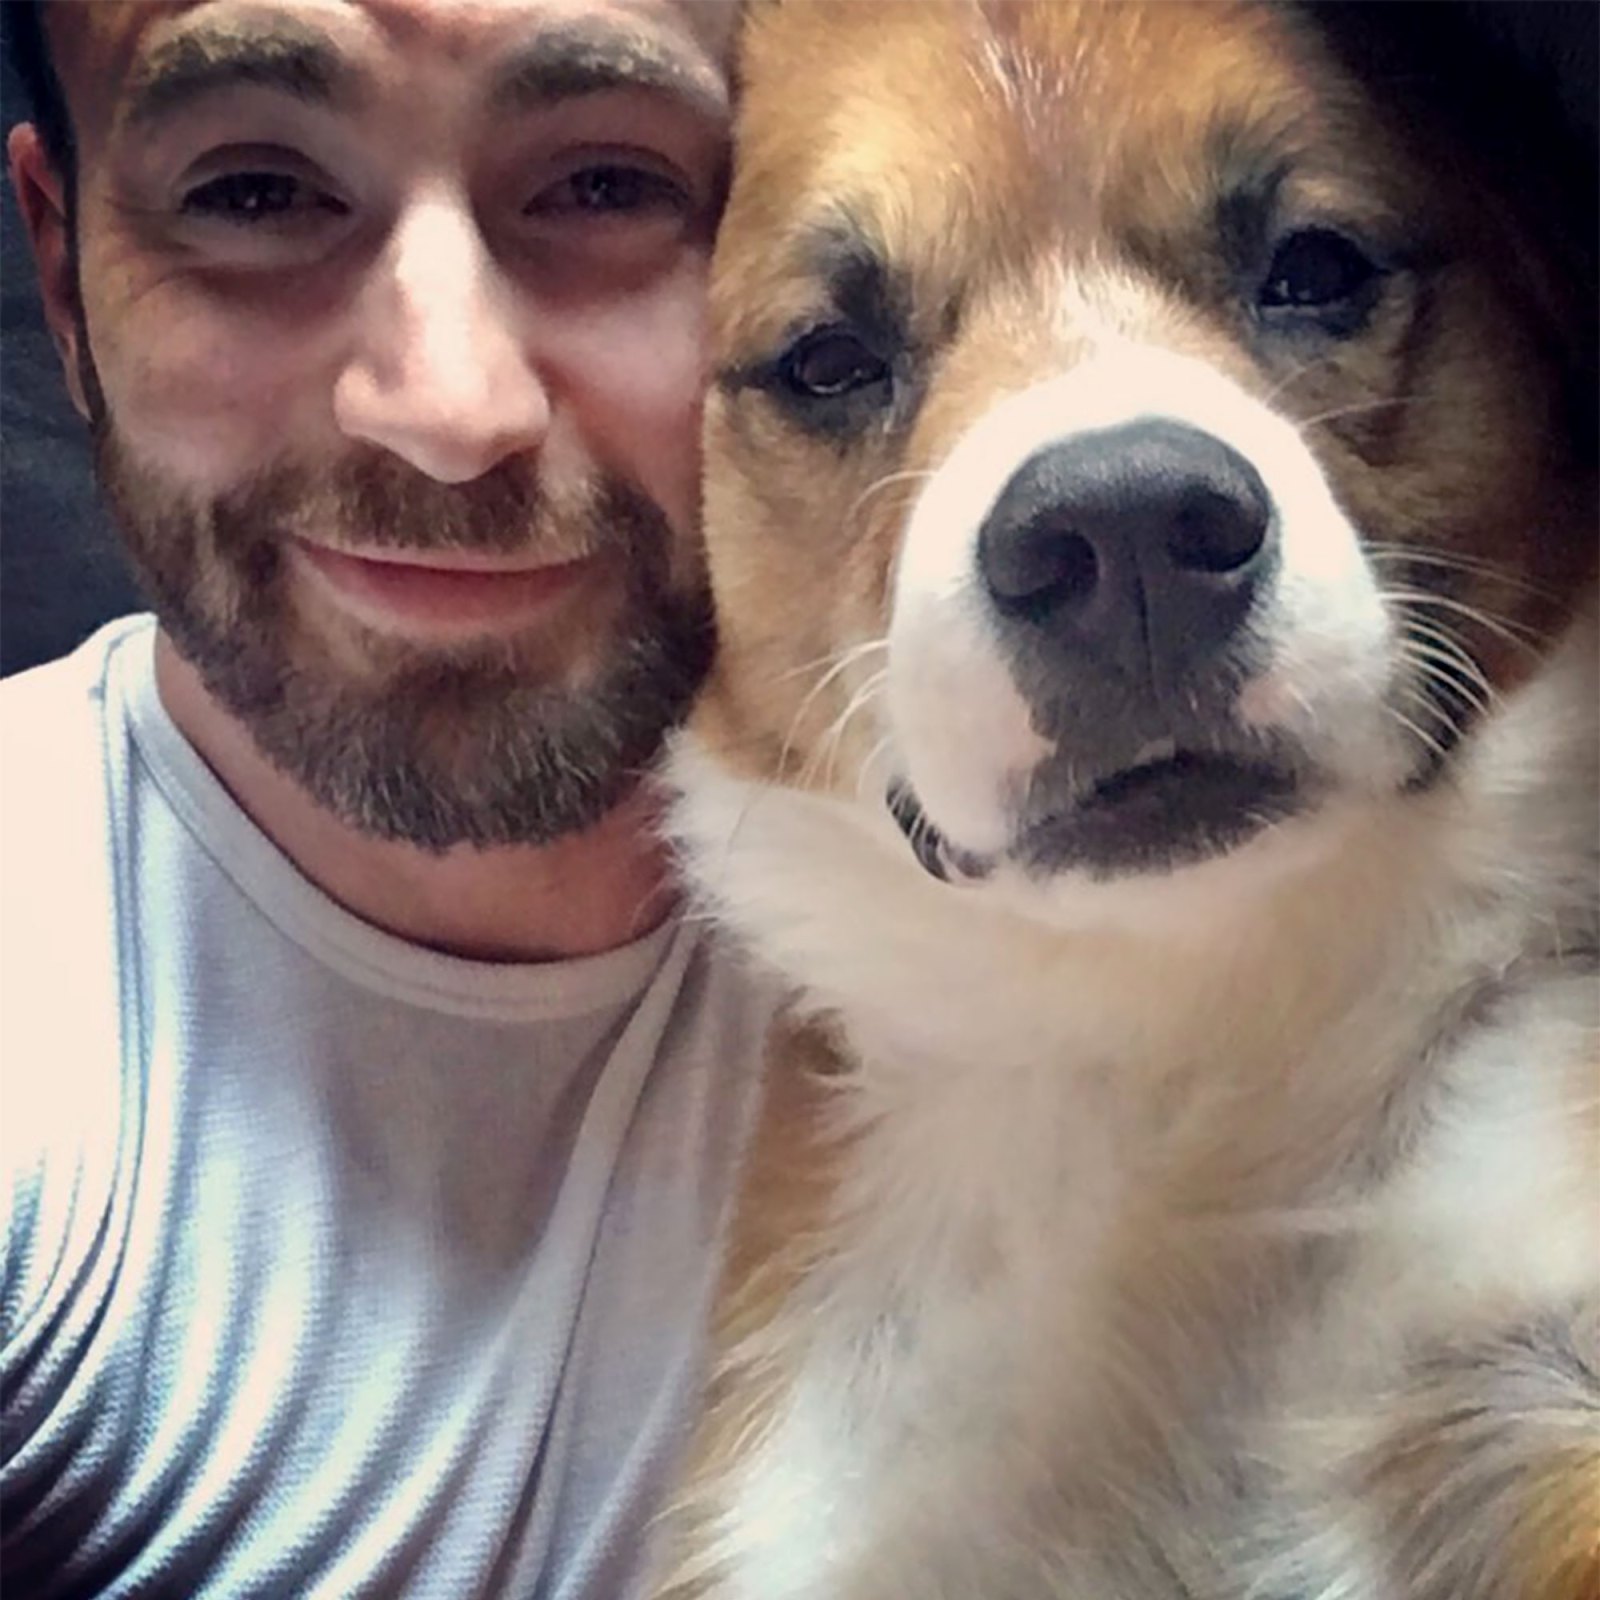 Gallery update: Chris Evans and His Dog Dodger: A Timeline of Their Pawsome Friendship